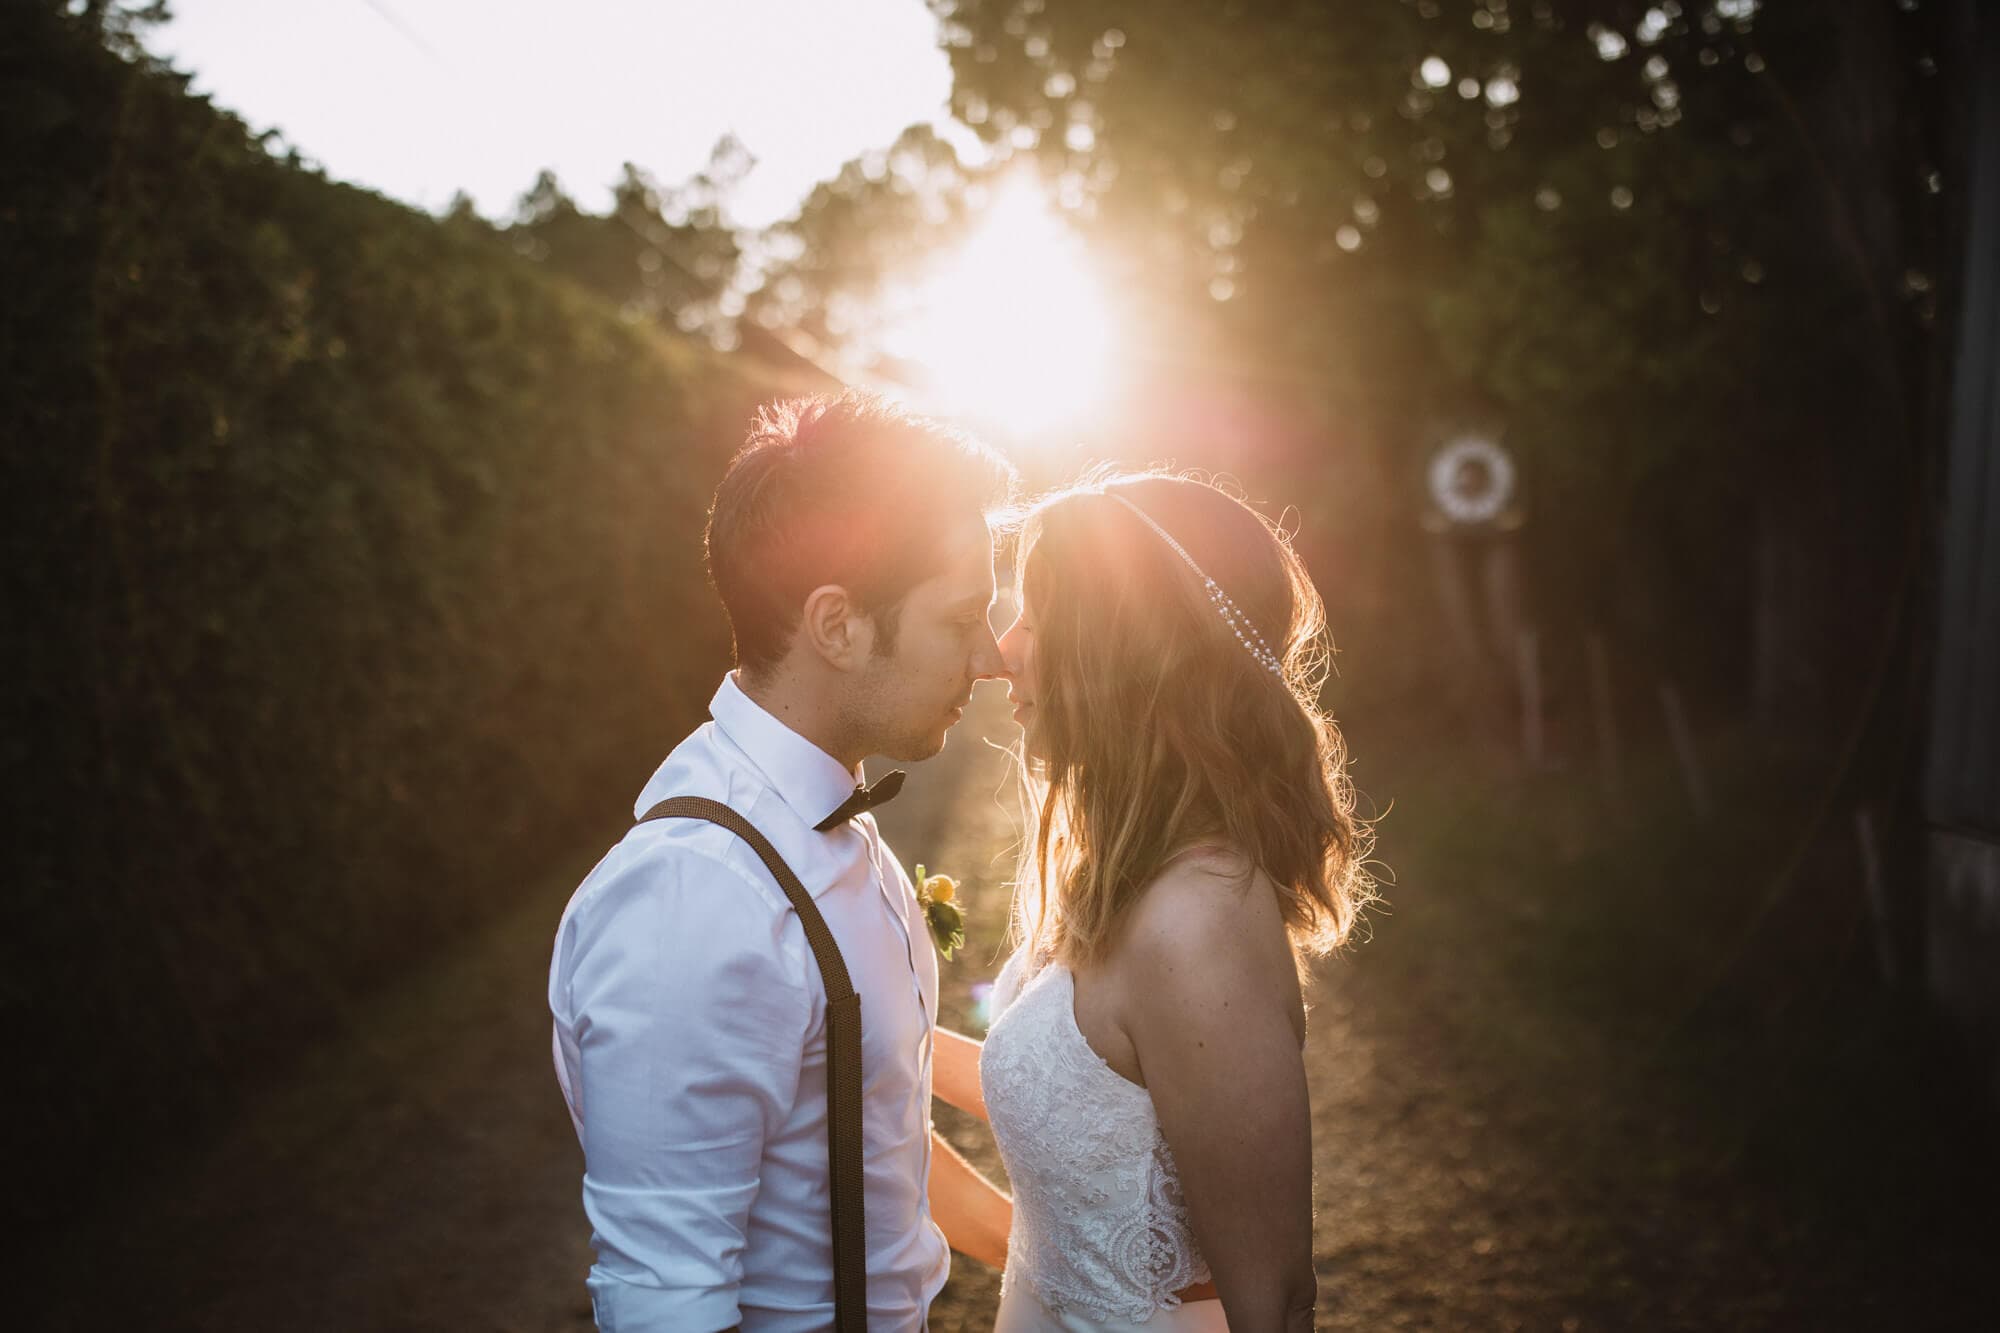 Quebec Wedding Intimate Bohemian Elopement Couple Dancing Montreal Photographer Couvent Val-Morin Convent Fireplace Bride Groom Sunset Golden Hour Flare